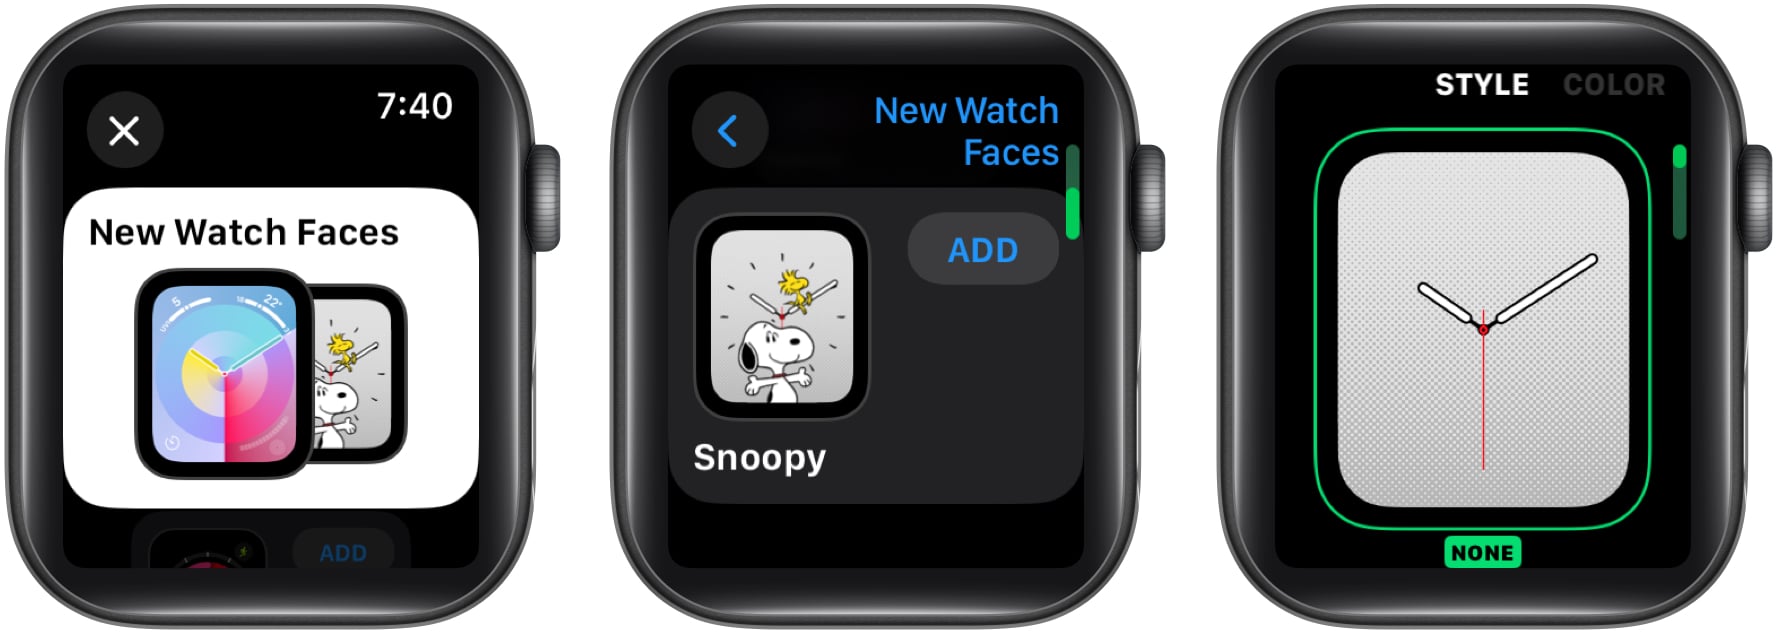 Choose-New-Watch-Faces-scroll-down-and-tap-Add-next-to-the-Snoopy-face-and-customize-the-colors-and-style-by-swiping-left-and-rotating-the-Digital-Crown